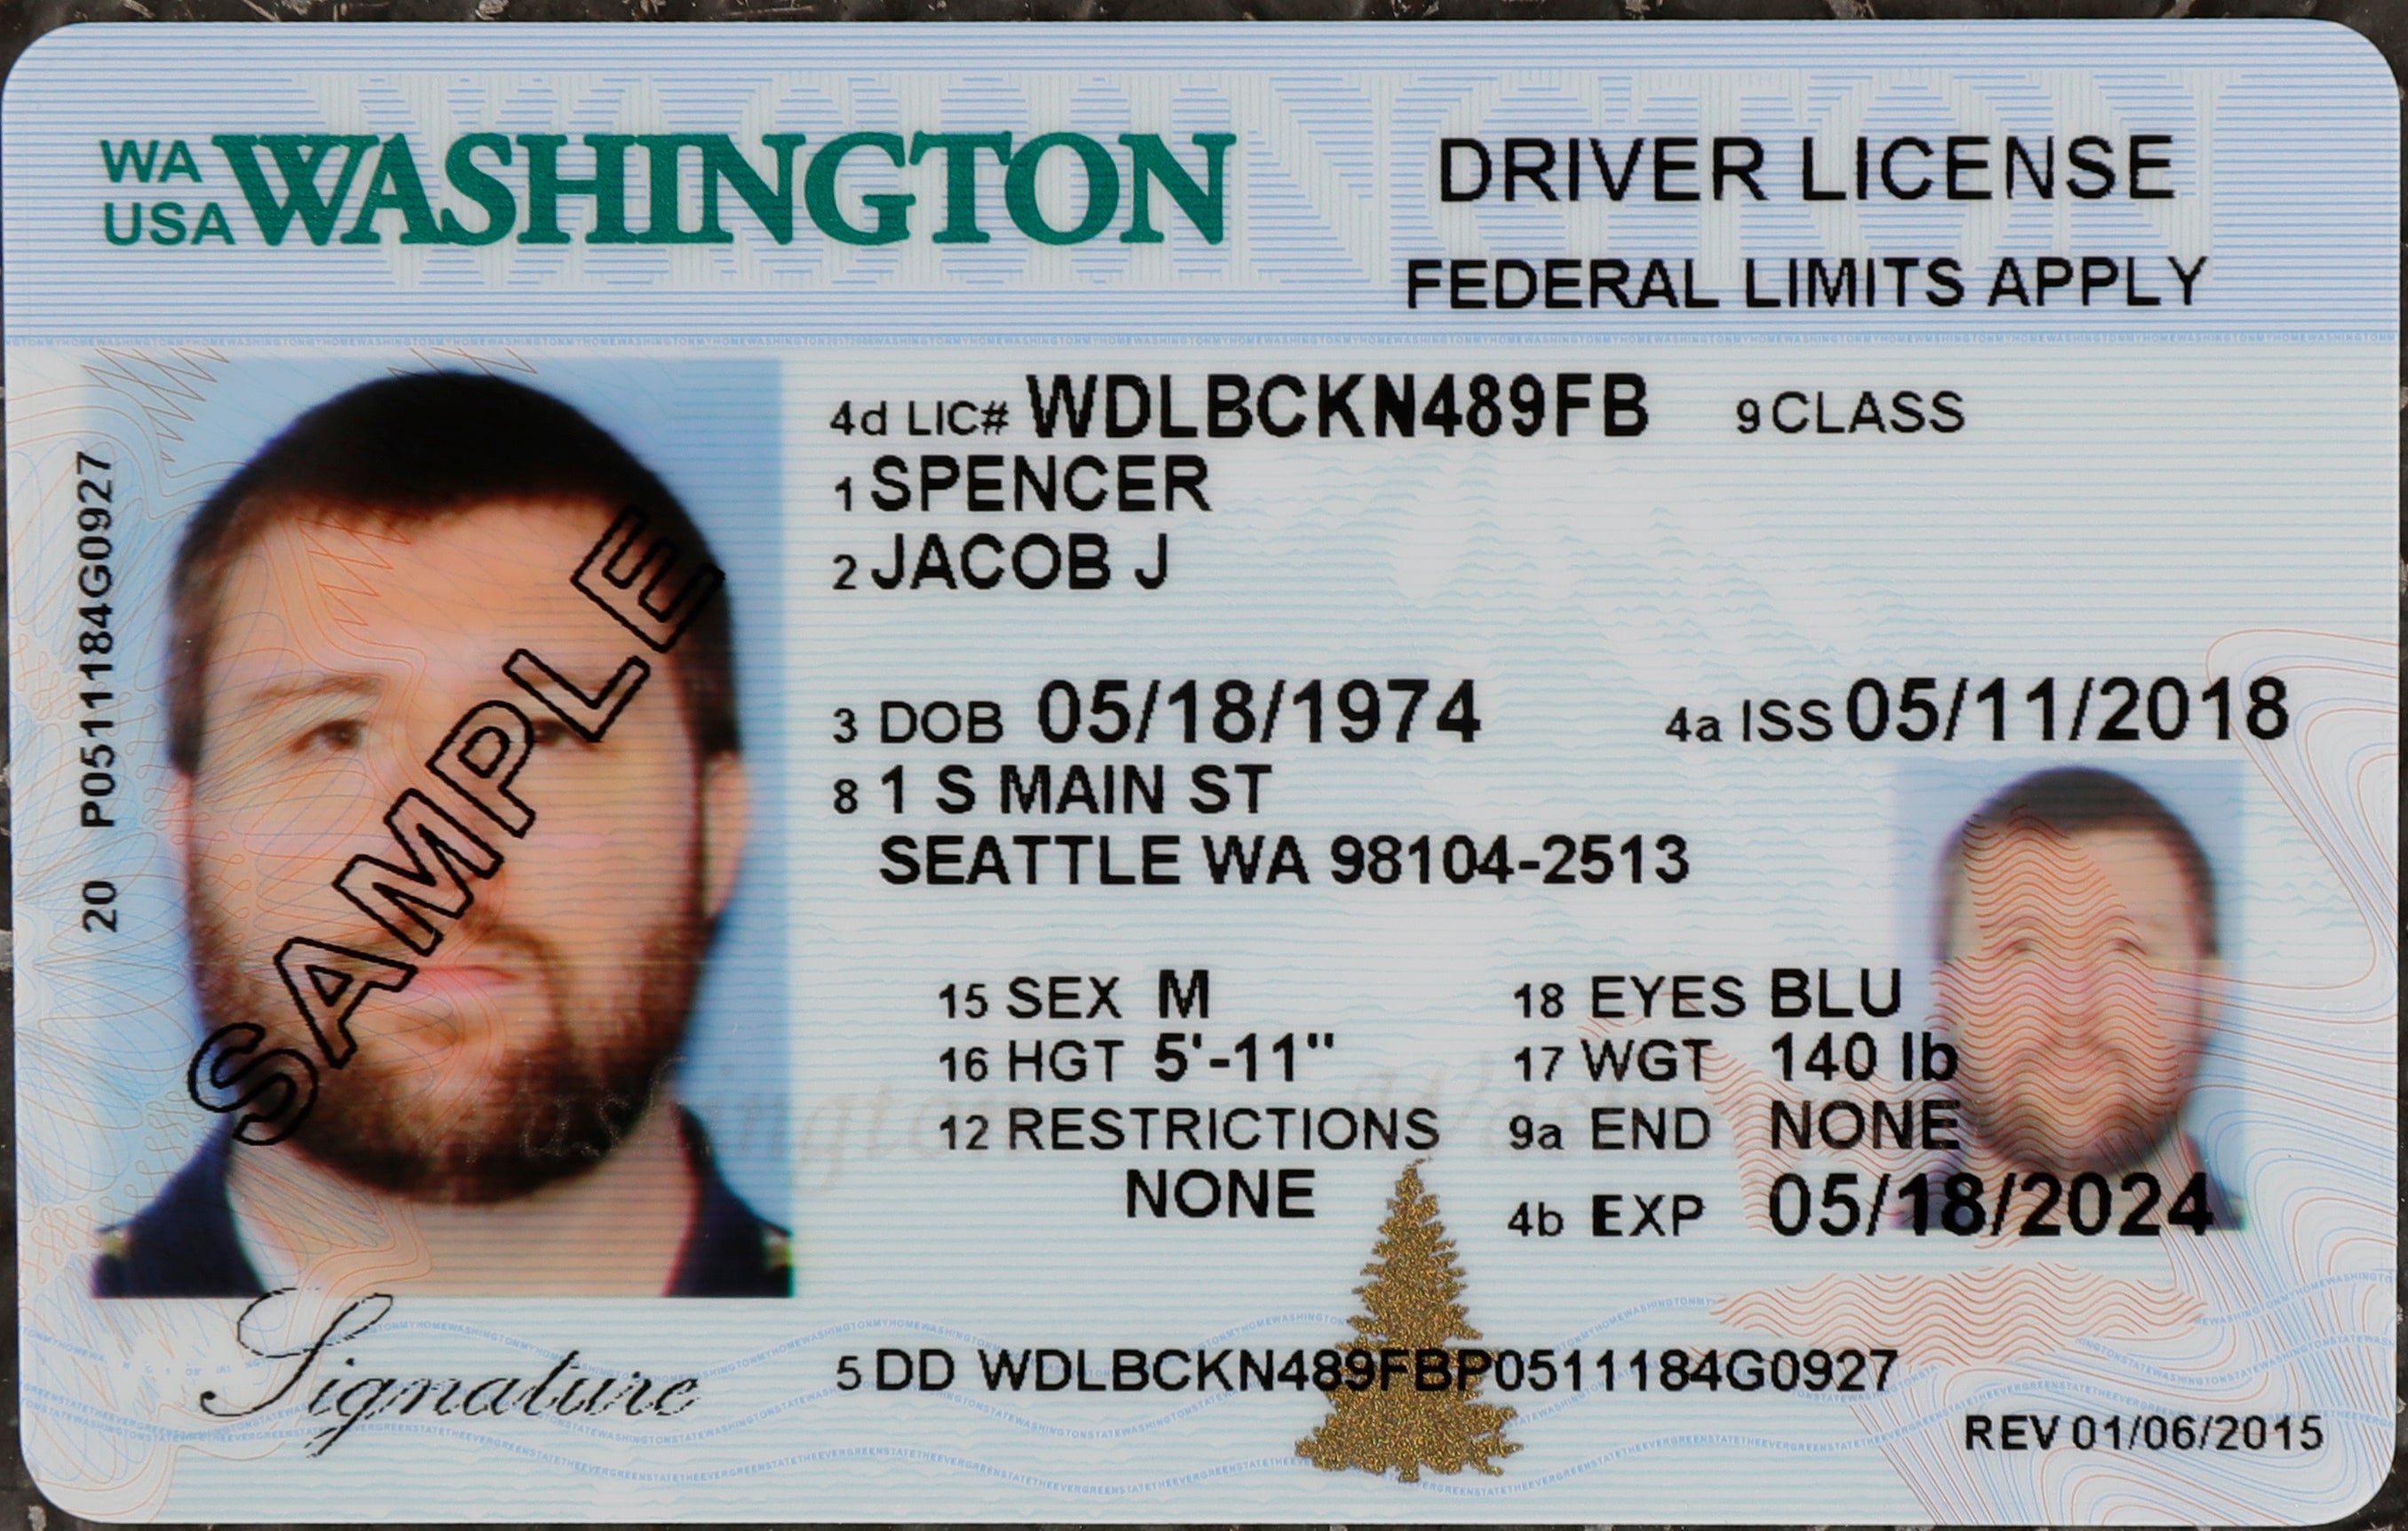 localize-it-government-delays-enforcement-of-real-id-act-the-independent